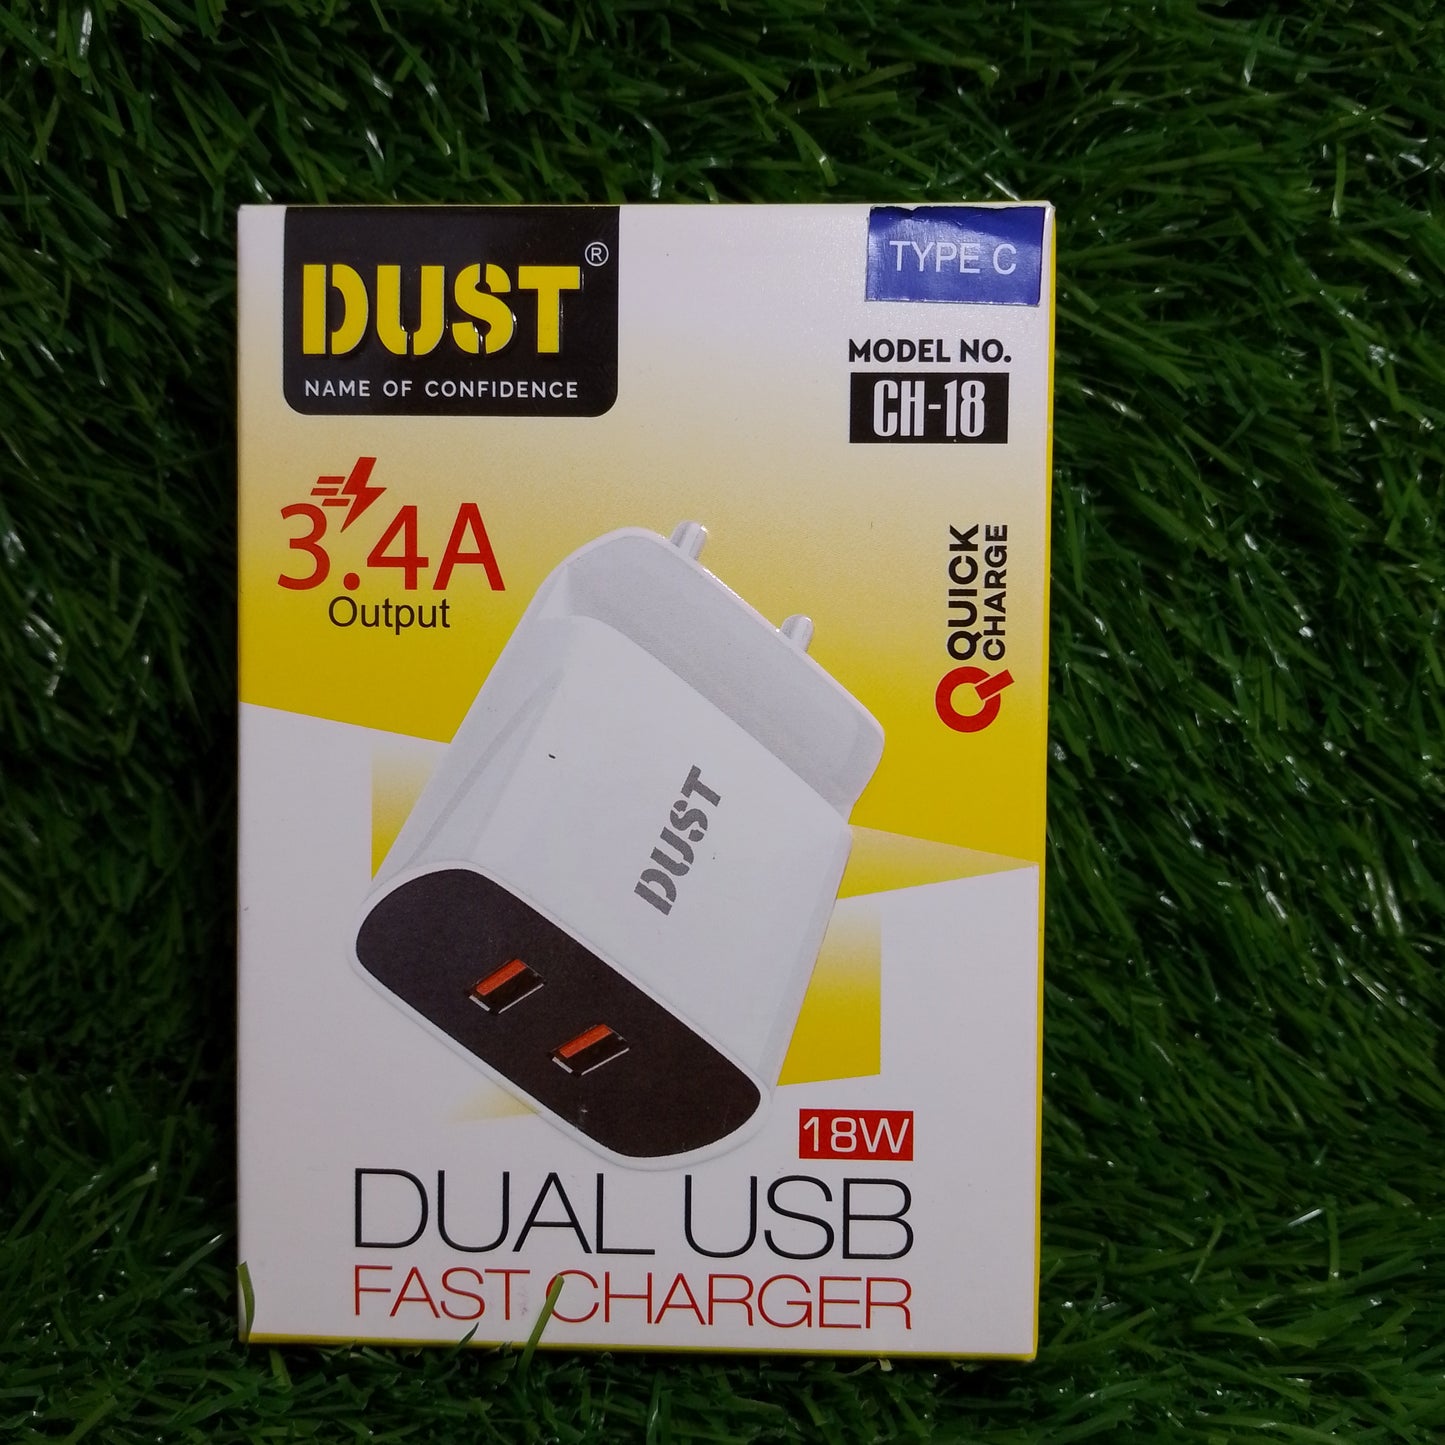 Dust CH-18 3.4A dual usc charger,cable type C,(1 steel bottle free on 10 pc purchase)